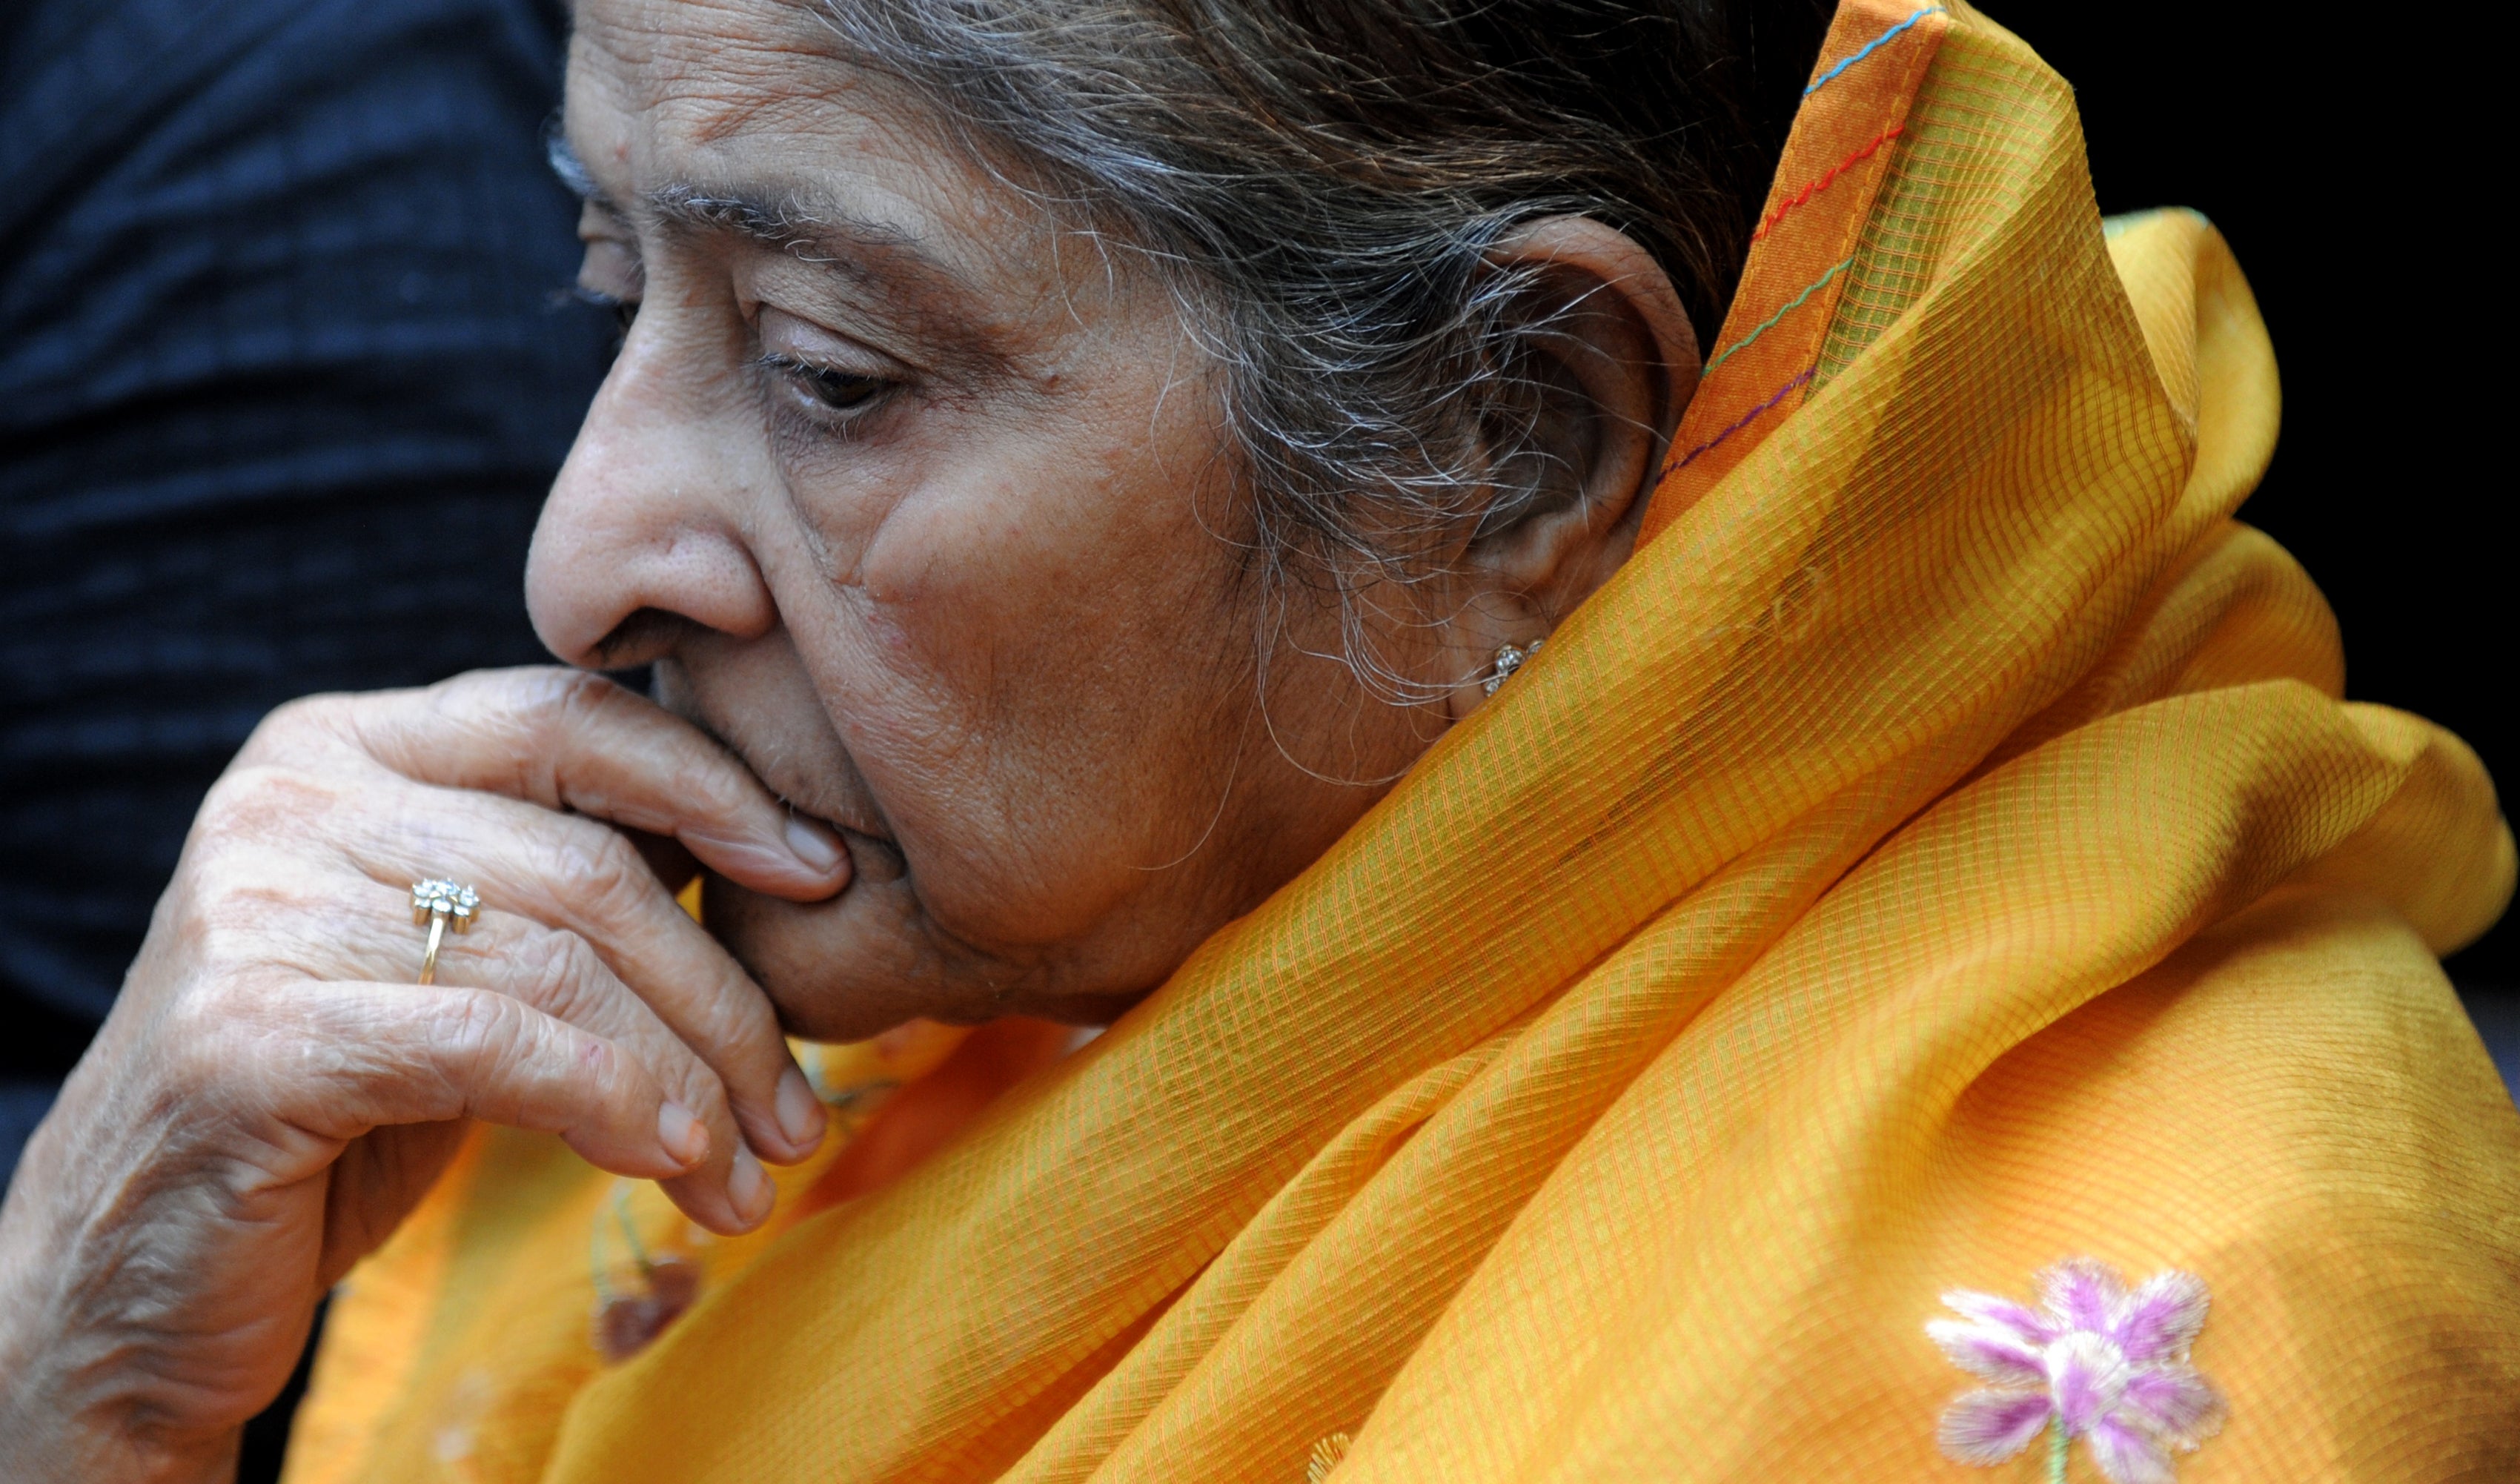 Indian widow Zakia Jafri looks on during a press interaction outside a court in Ahmedabad on 26 December 2013, following a judgement in favour of then-chief minister of Gujarat Narendra Modi over his role in the 2002 religious riots